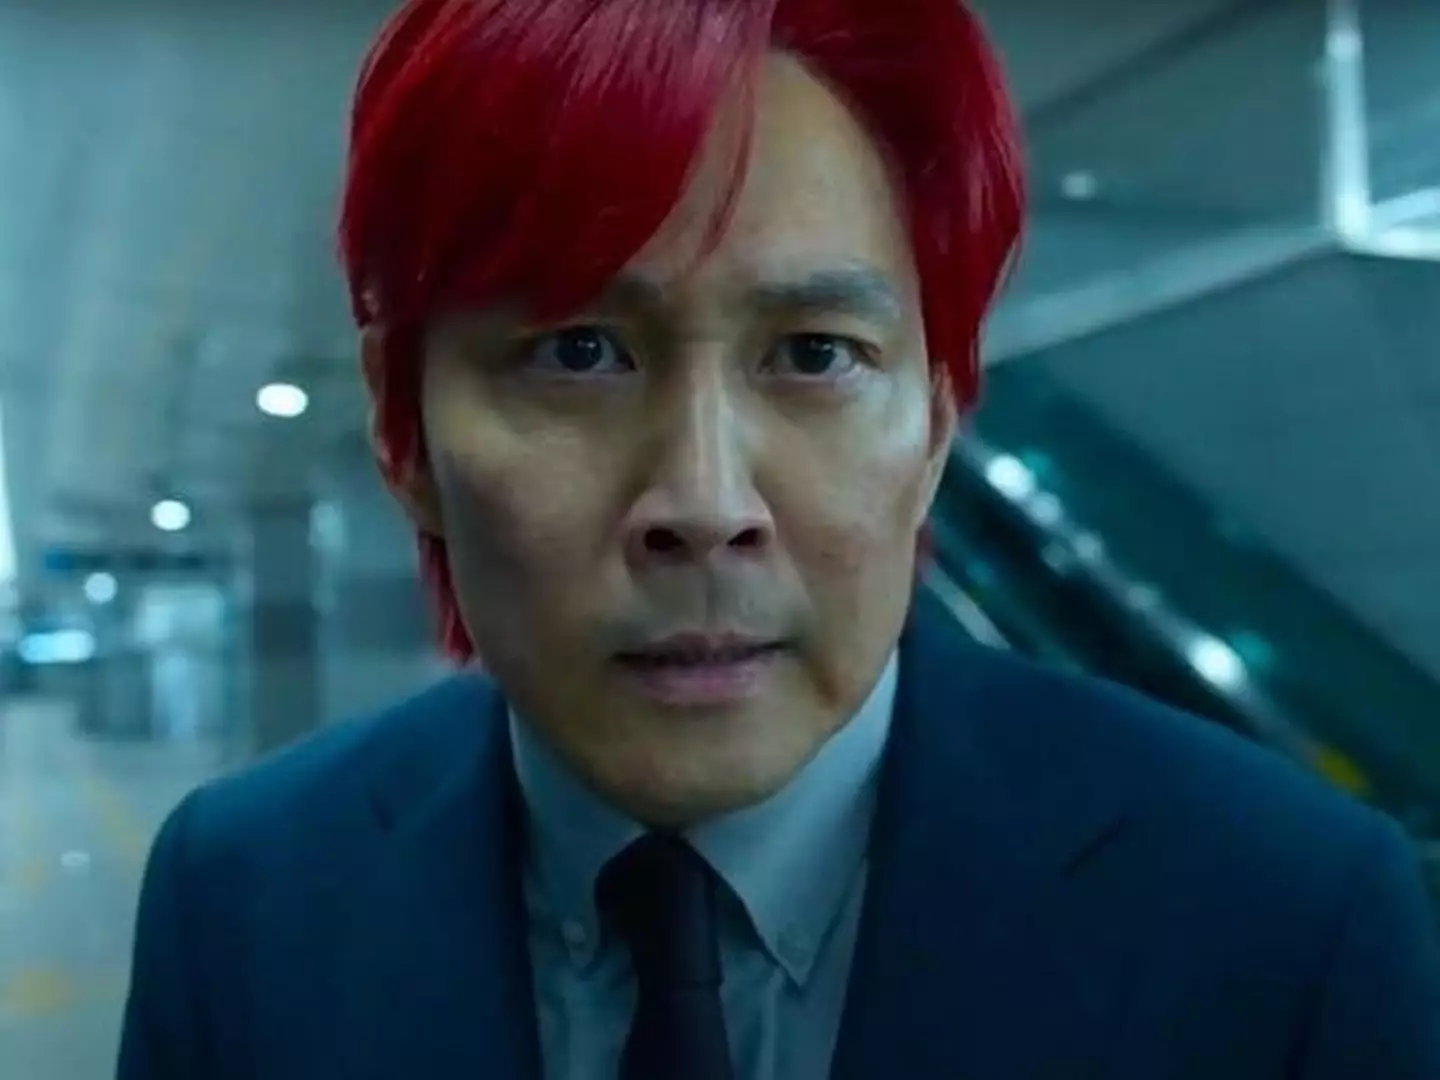 The red hair is more symbolic, the director has argued (